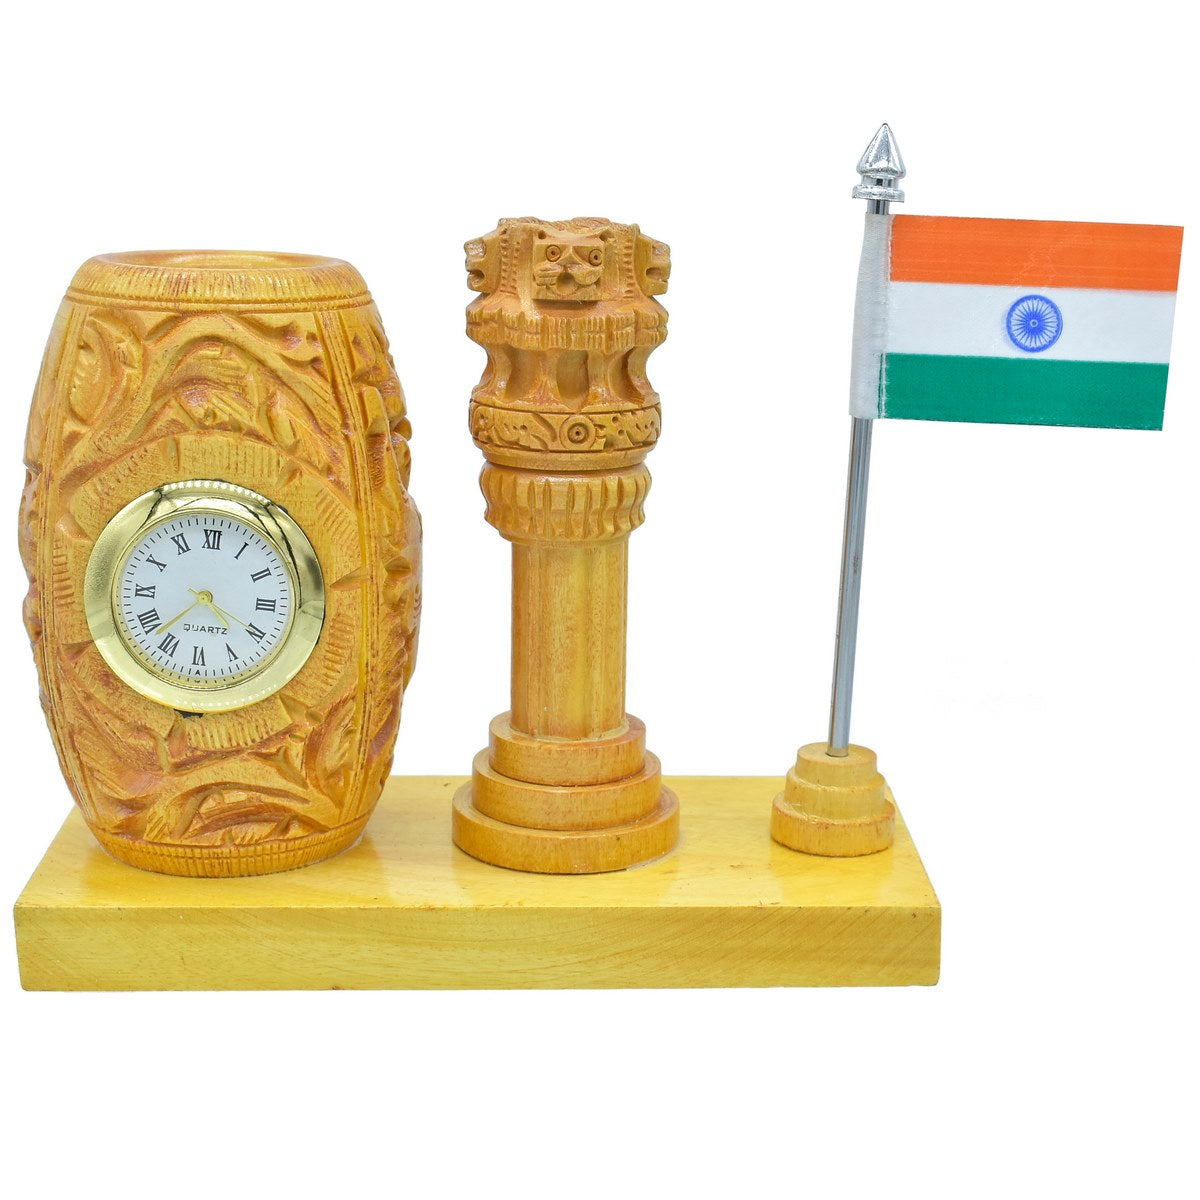 Wooden Pen Stand cum Clock with Ashoka Pillar and Indian Flag Table Top - For Corporate Gifting, Office, School, College Use, Independence Day, Republic Day Gift Item